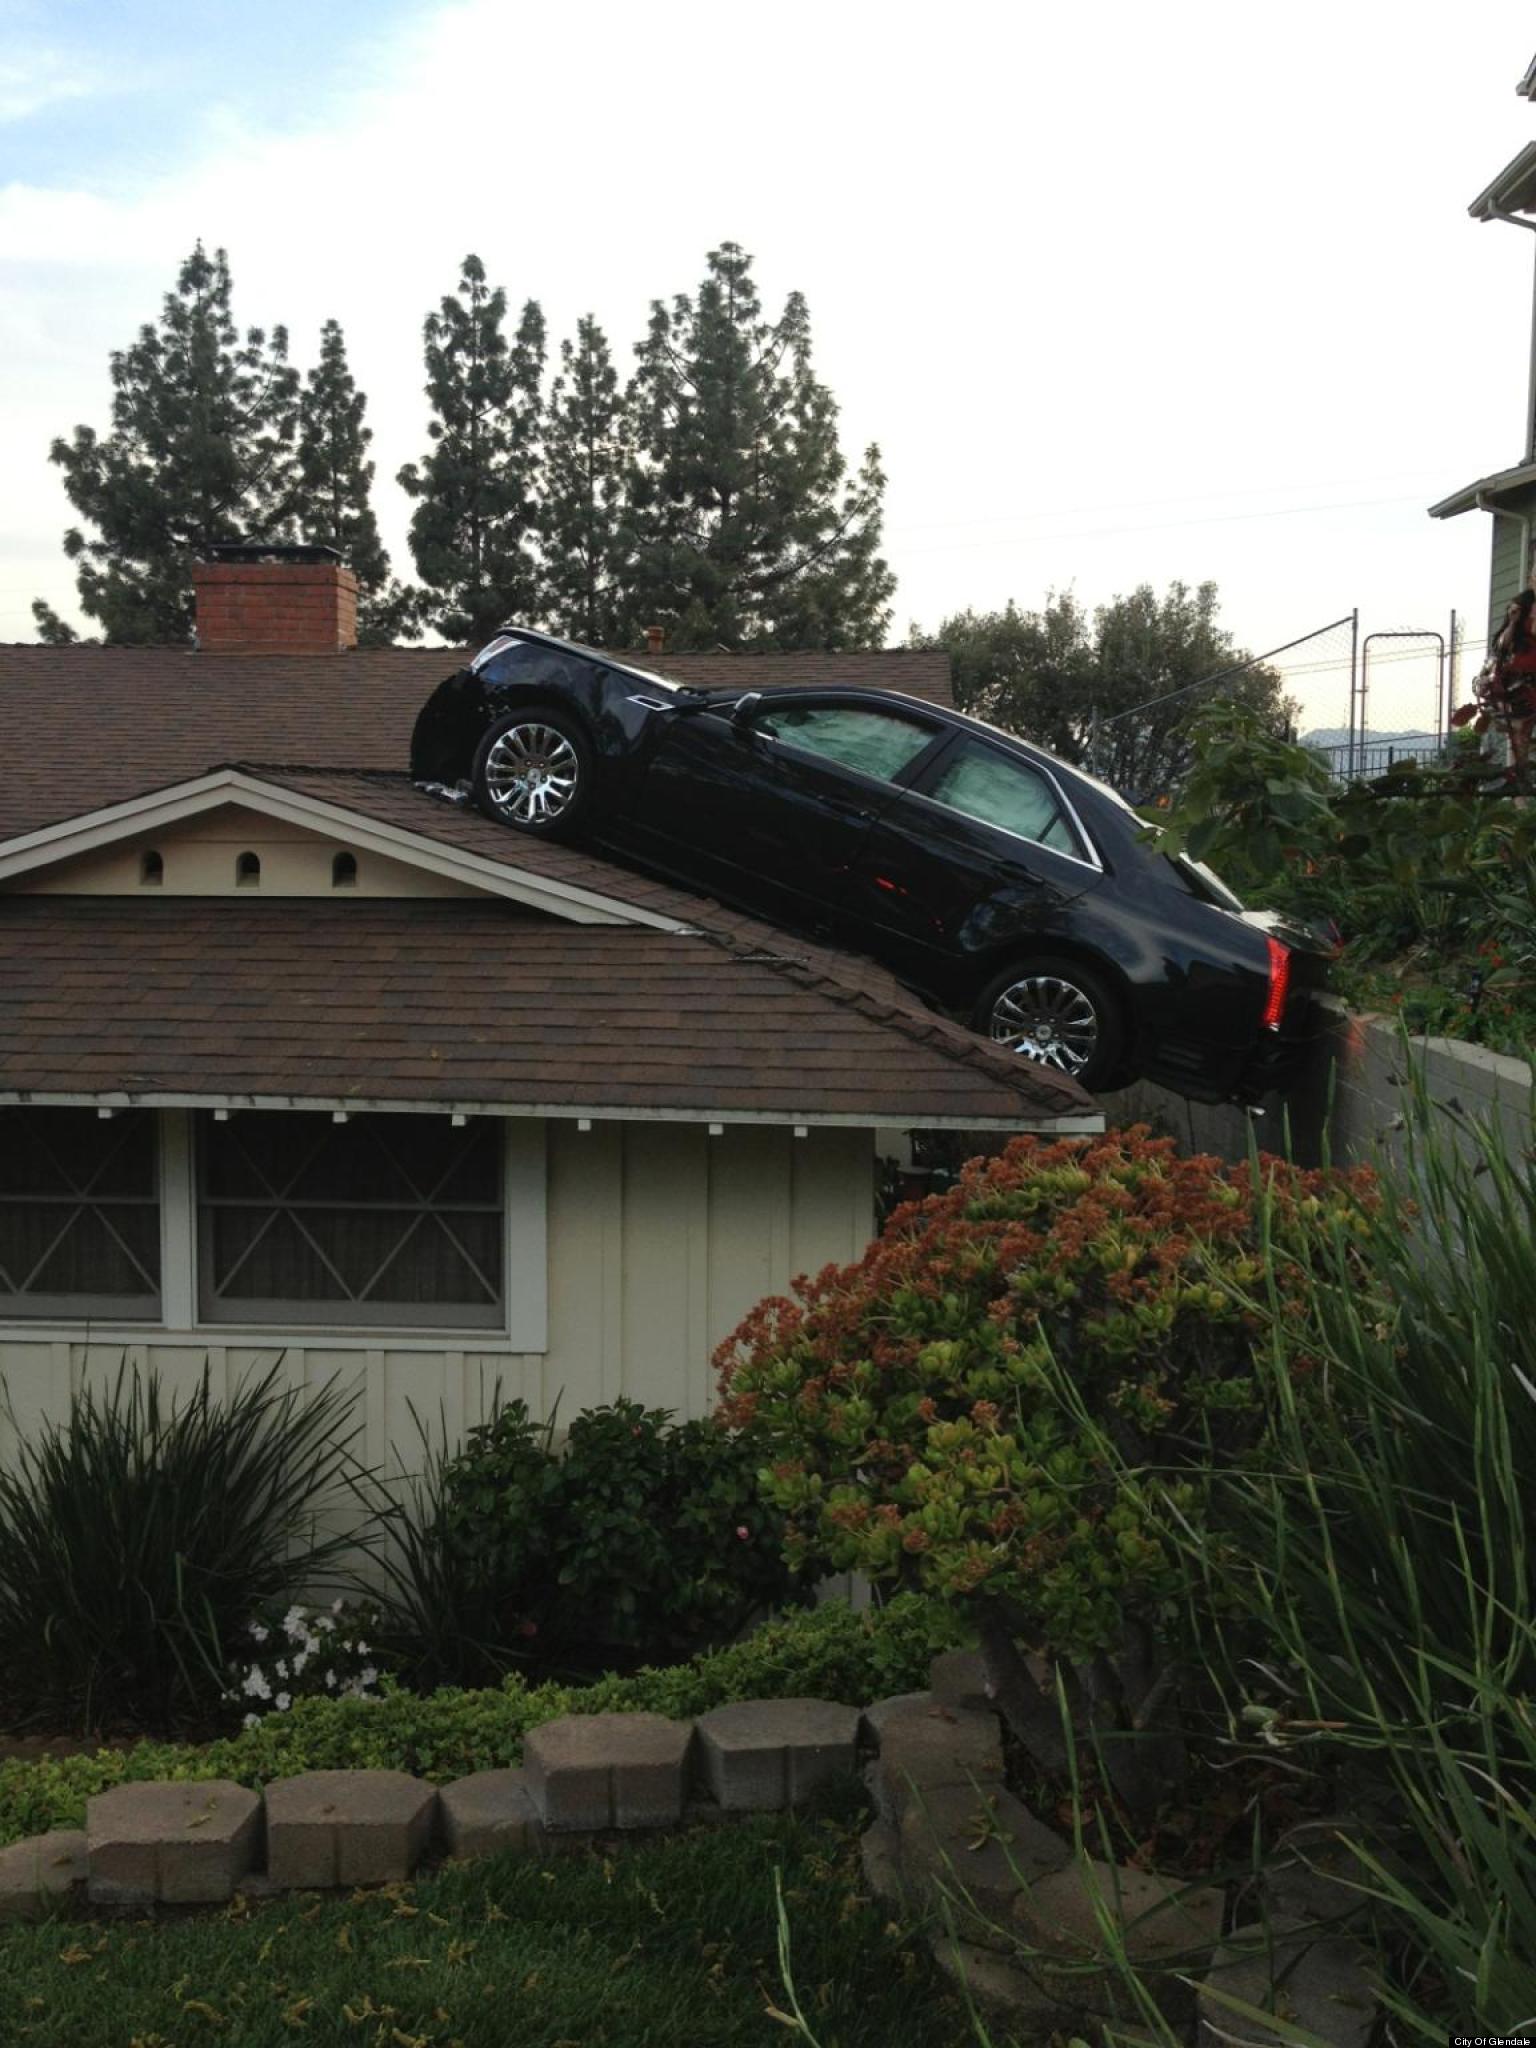 Car Lands On Roof In Glendale Calif Driver Robert Wynn Claims Brakes Failed Photo Video